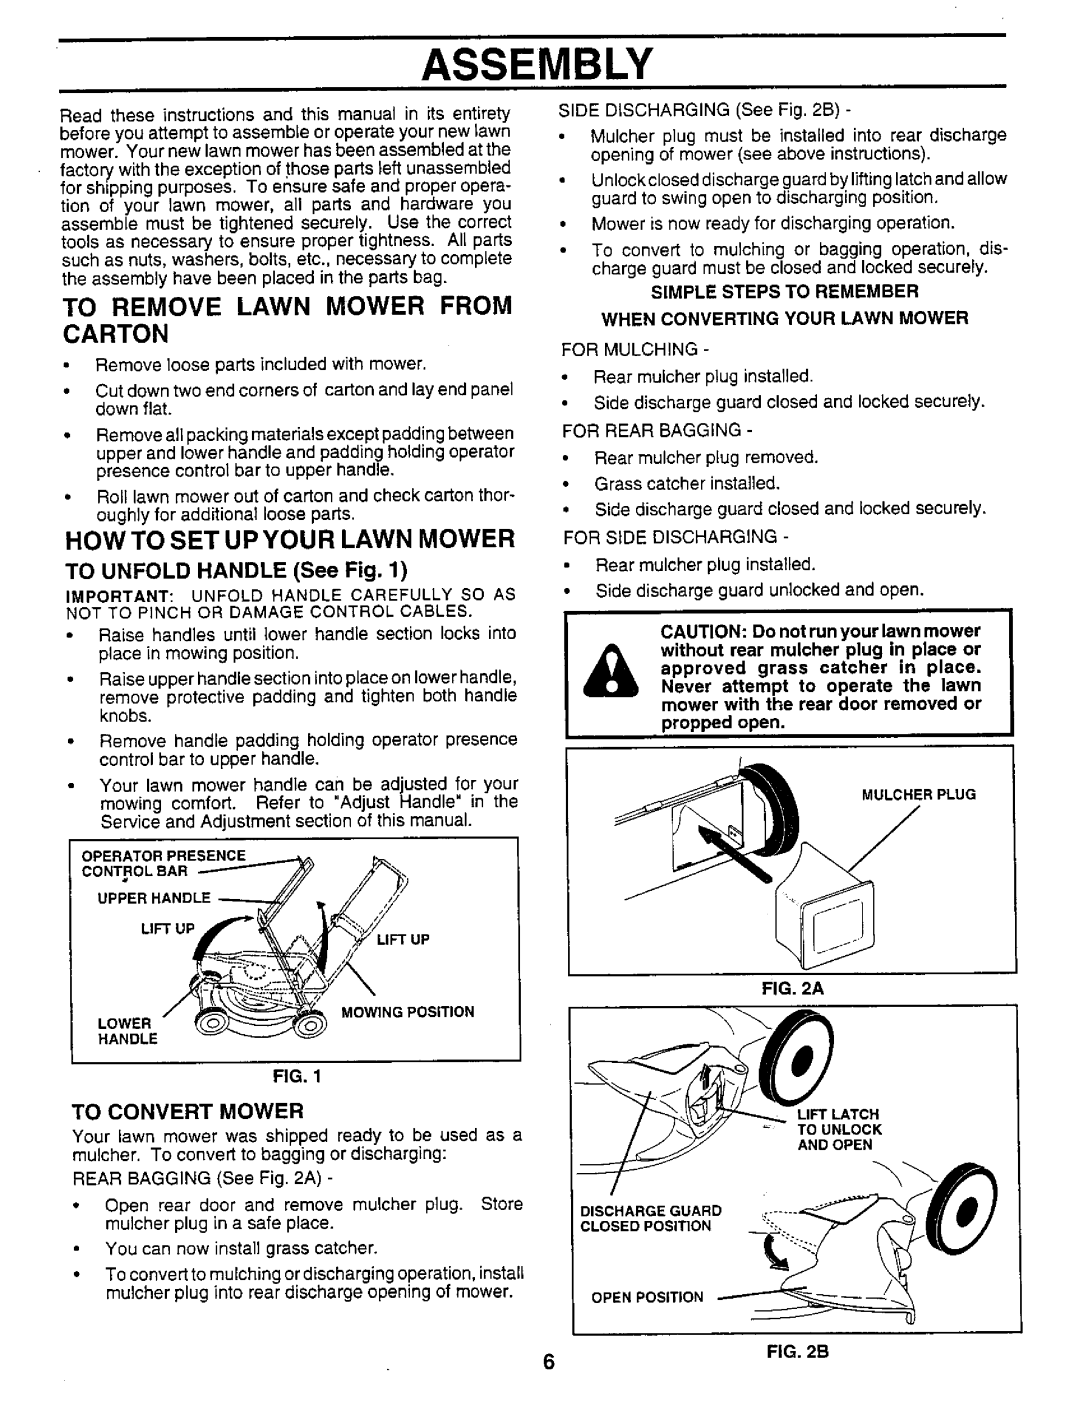 Sears 917.373981 owner manual Assembly, Carton, To Remove Lawn Mower From, Howto Set Upyour Lawn Mower 